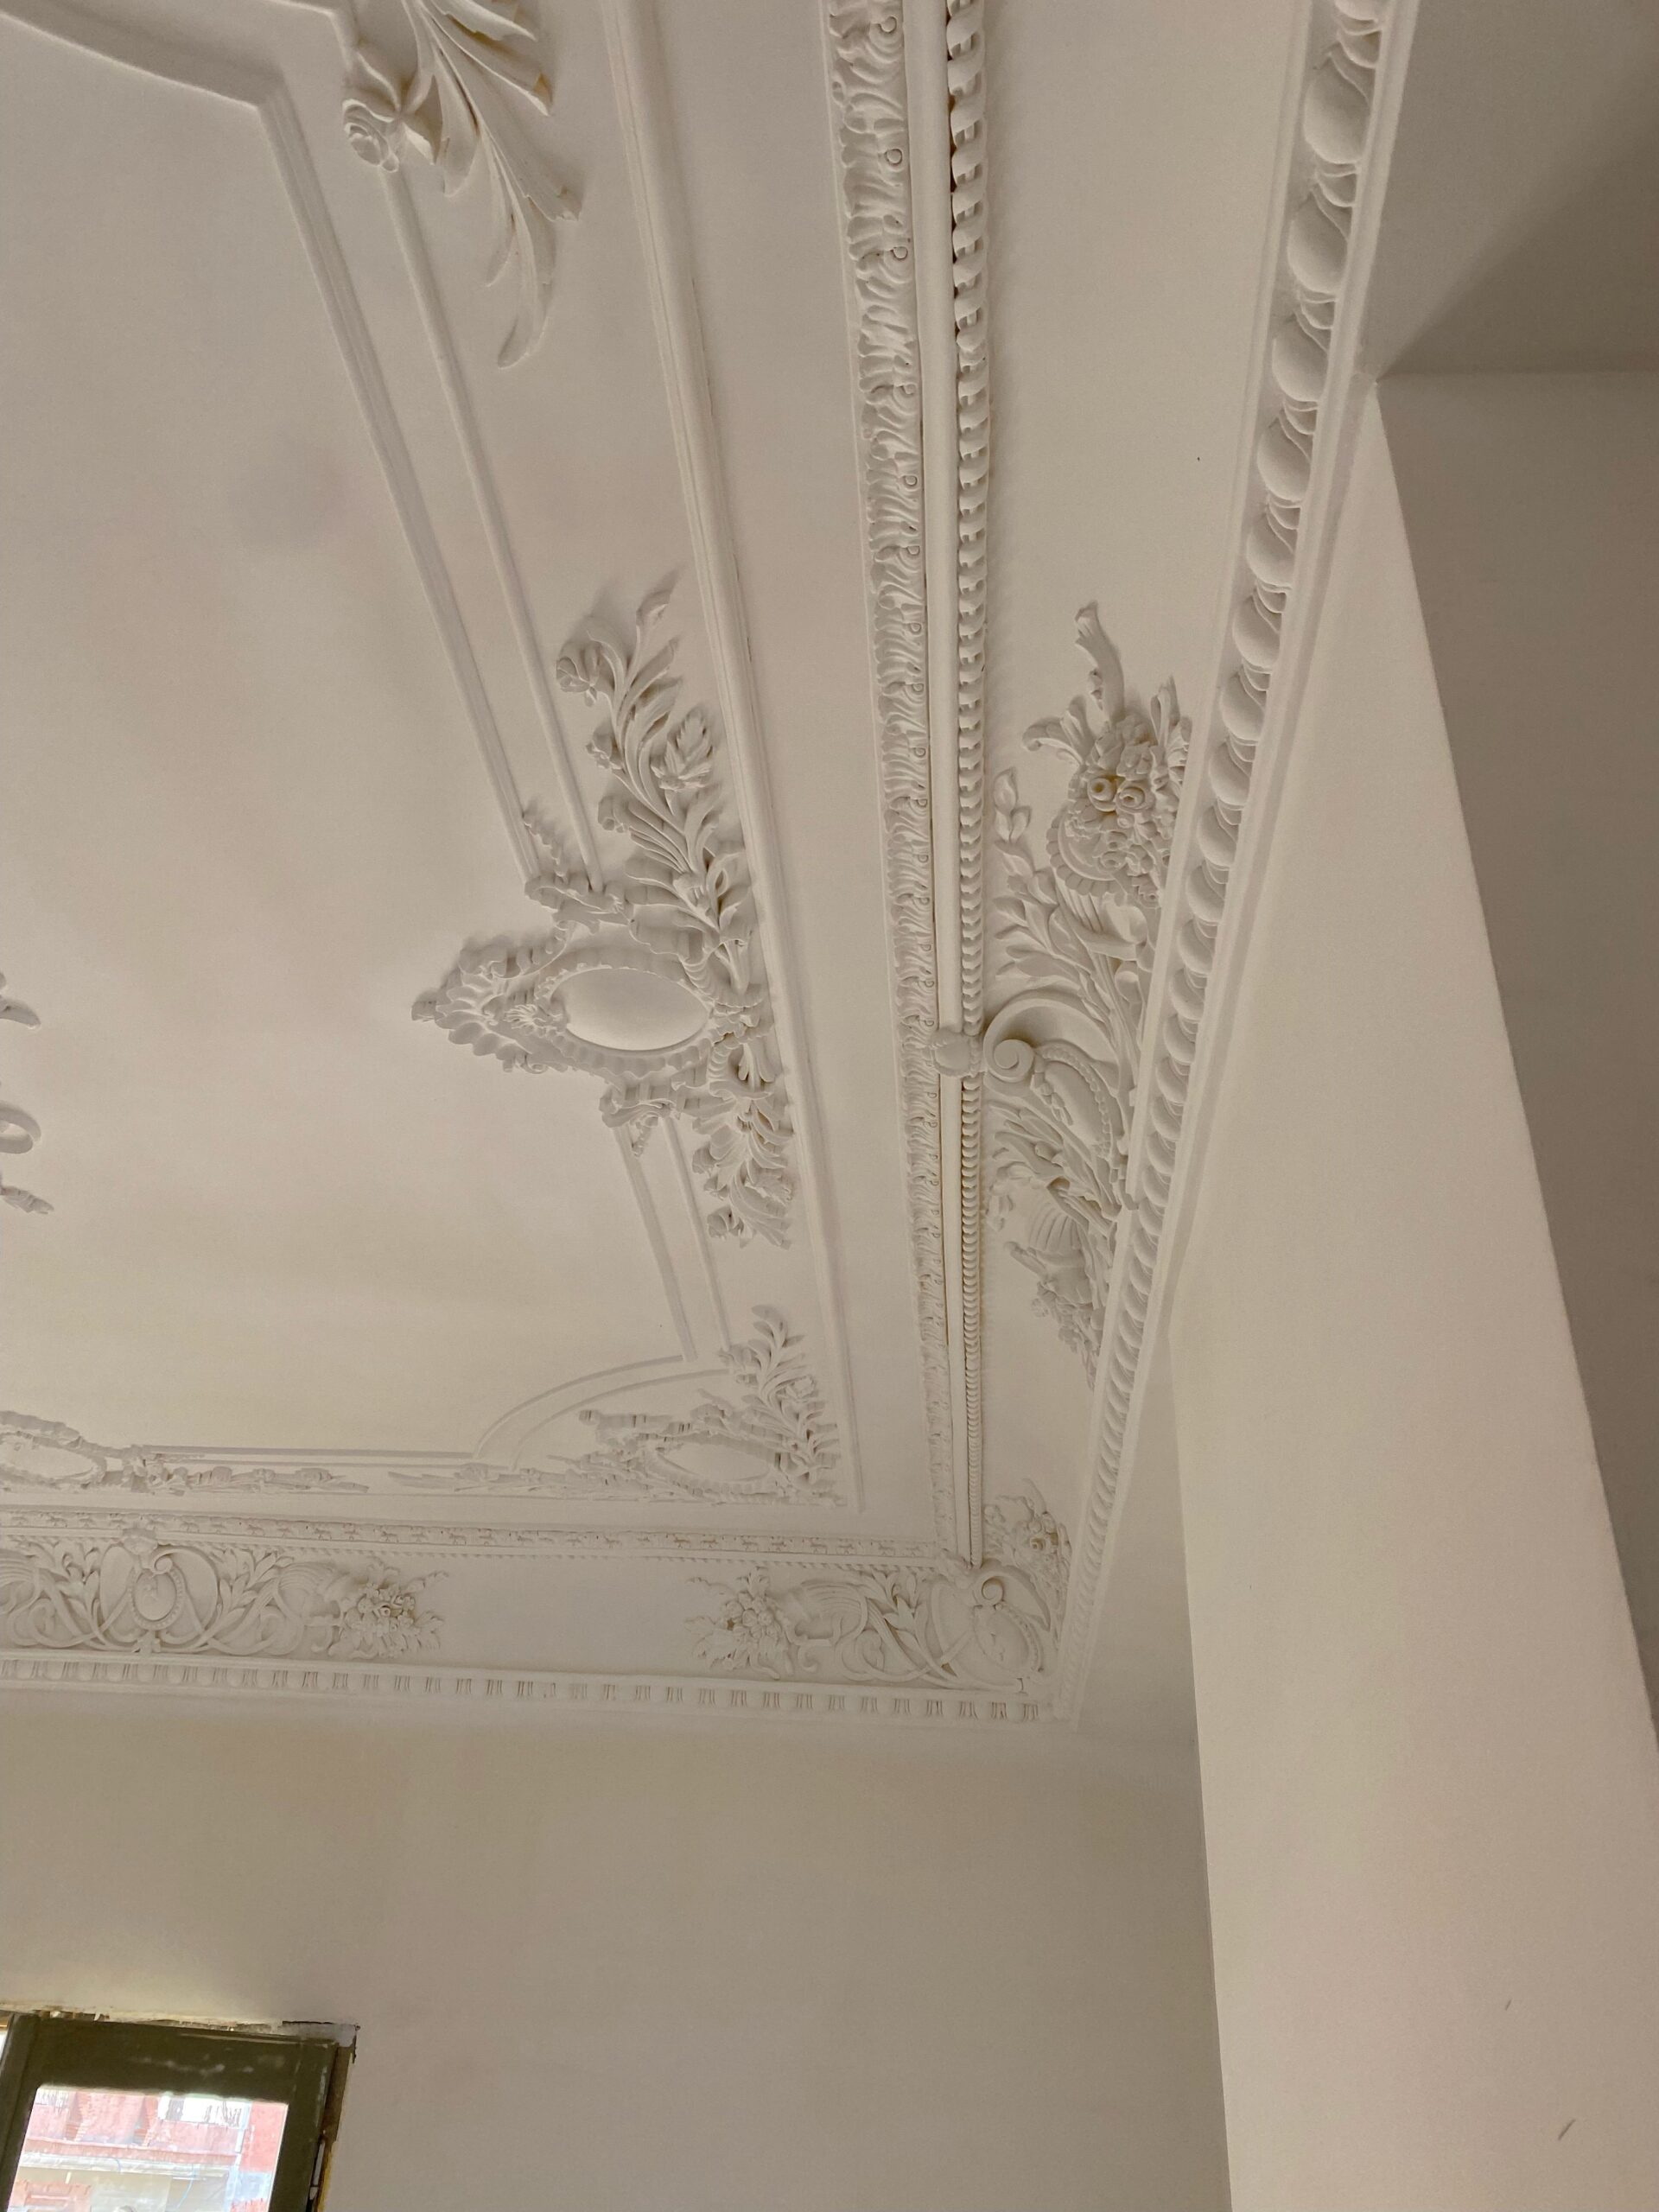 More crown molding & ceiling art.